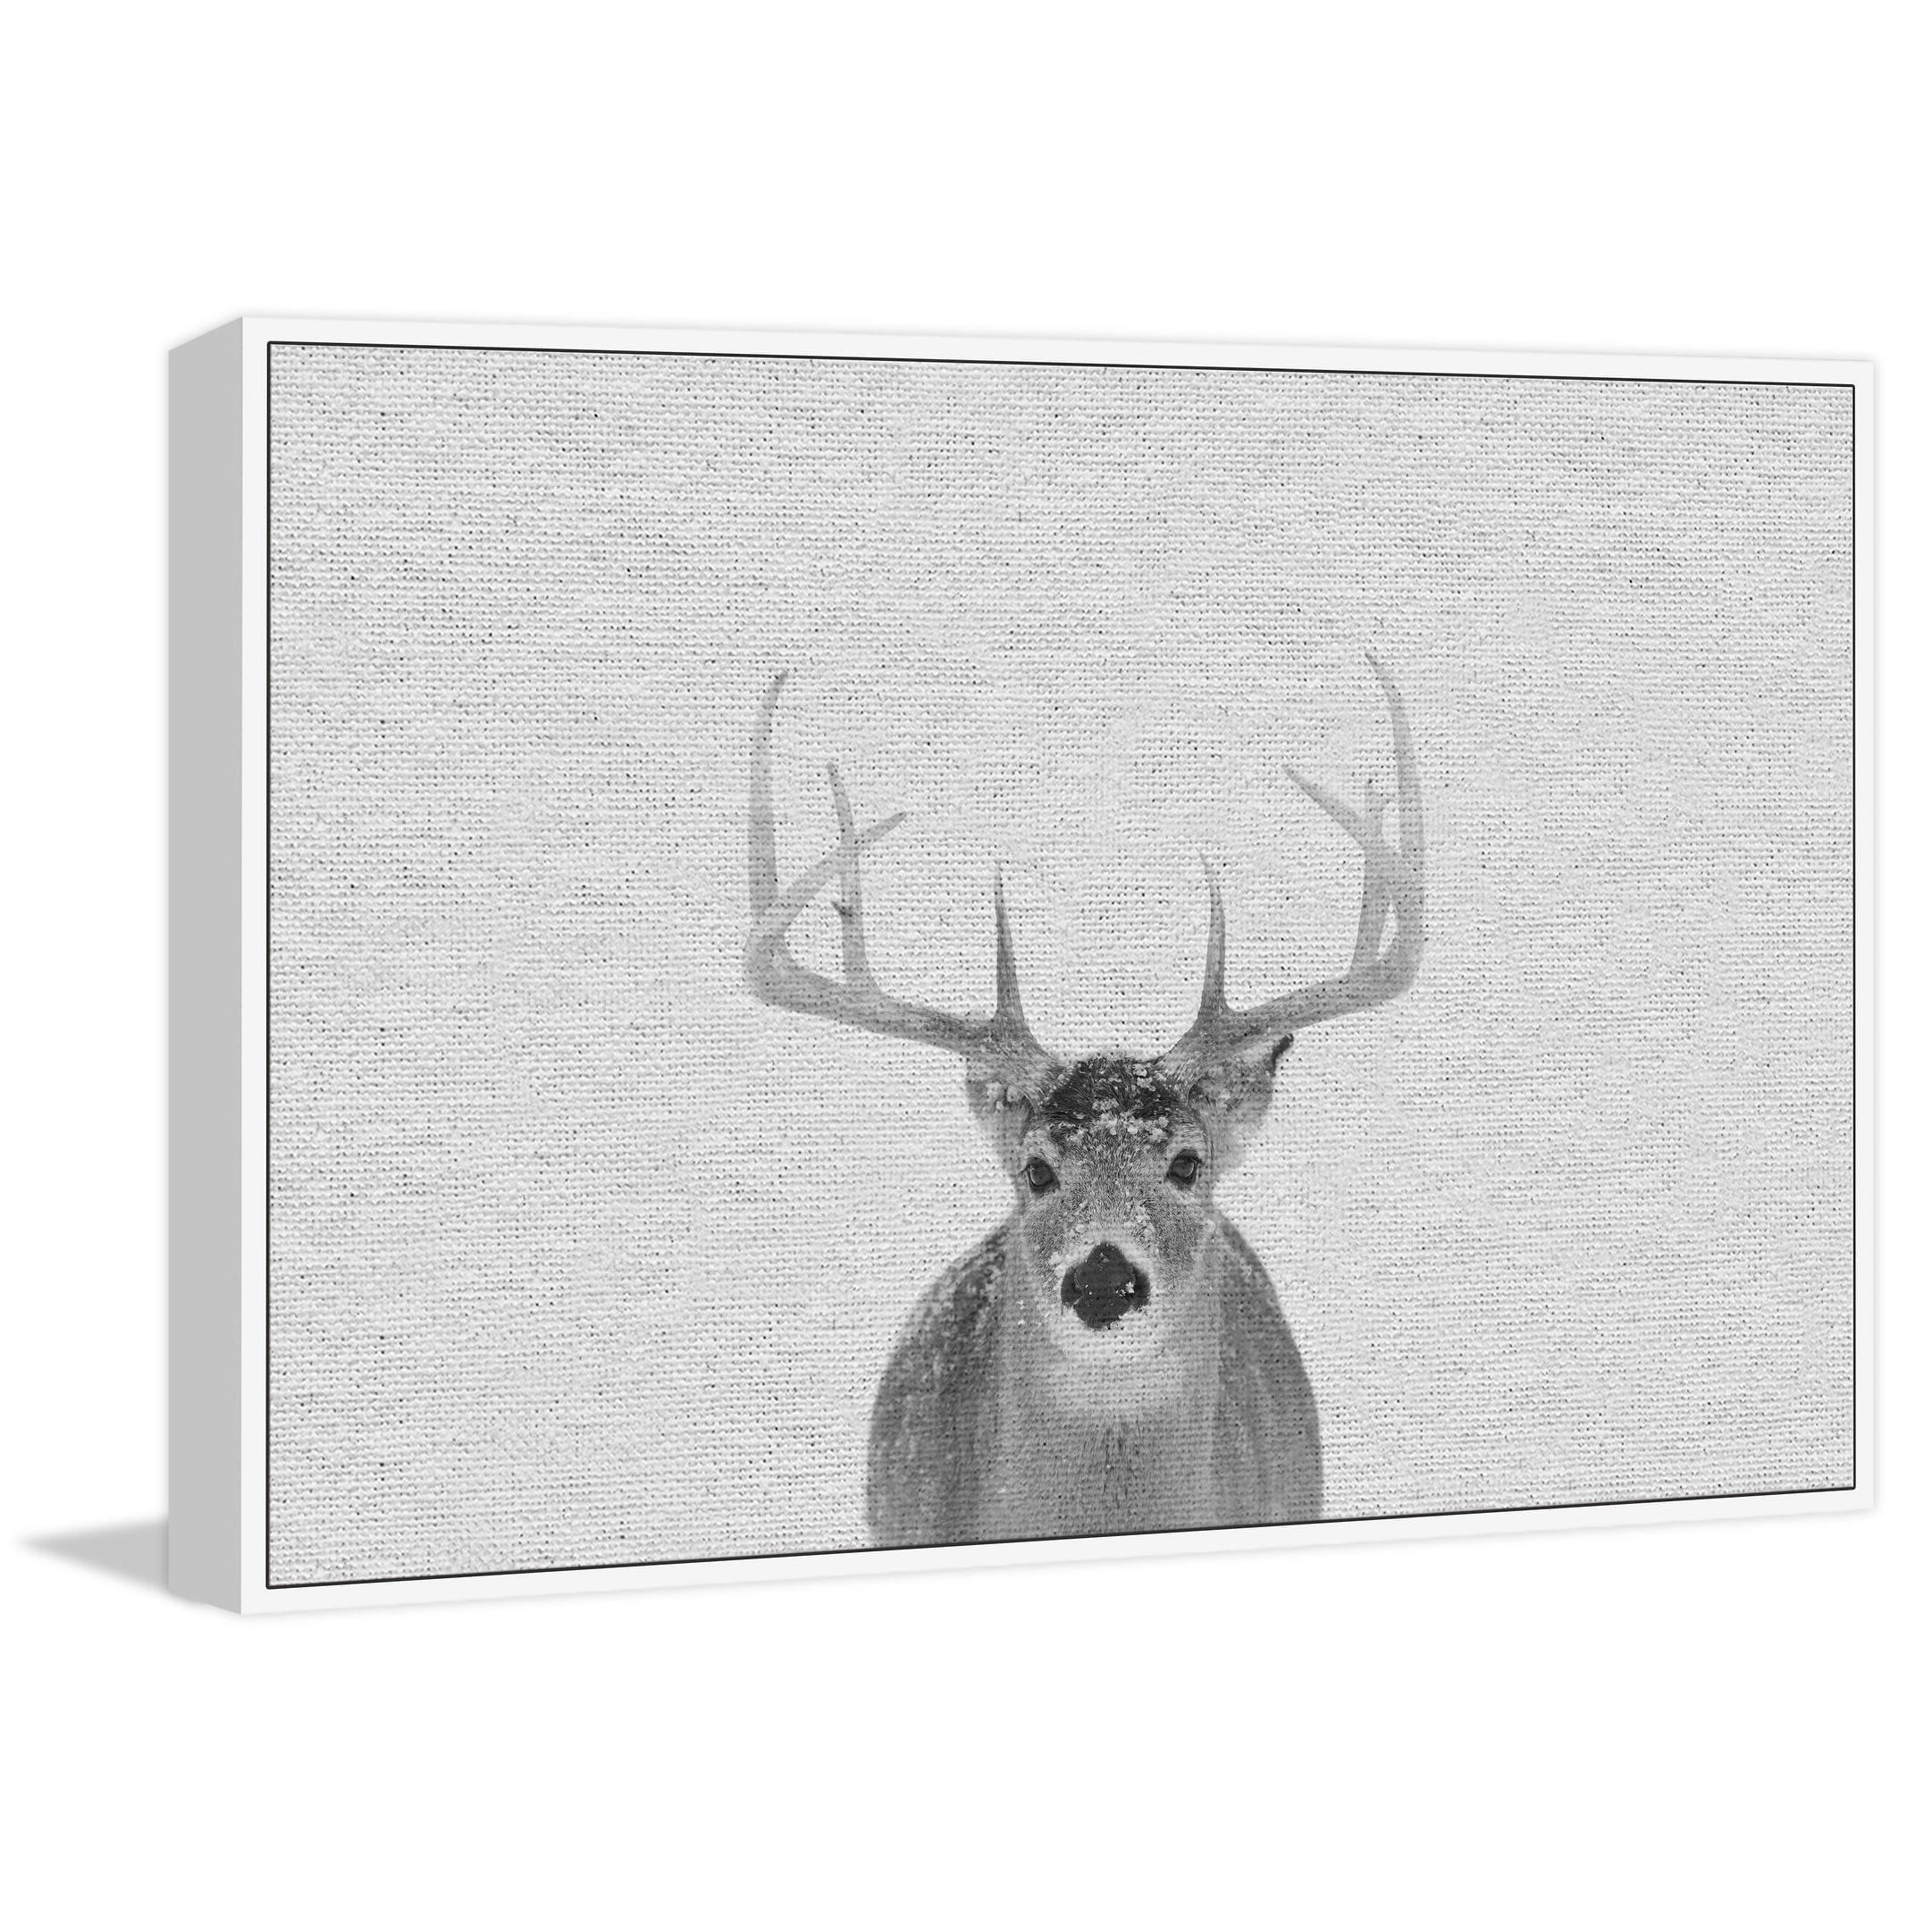 Marmont Hill - Handmade Serious Deer Floater Framed Print on Canvas